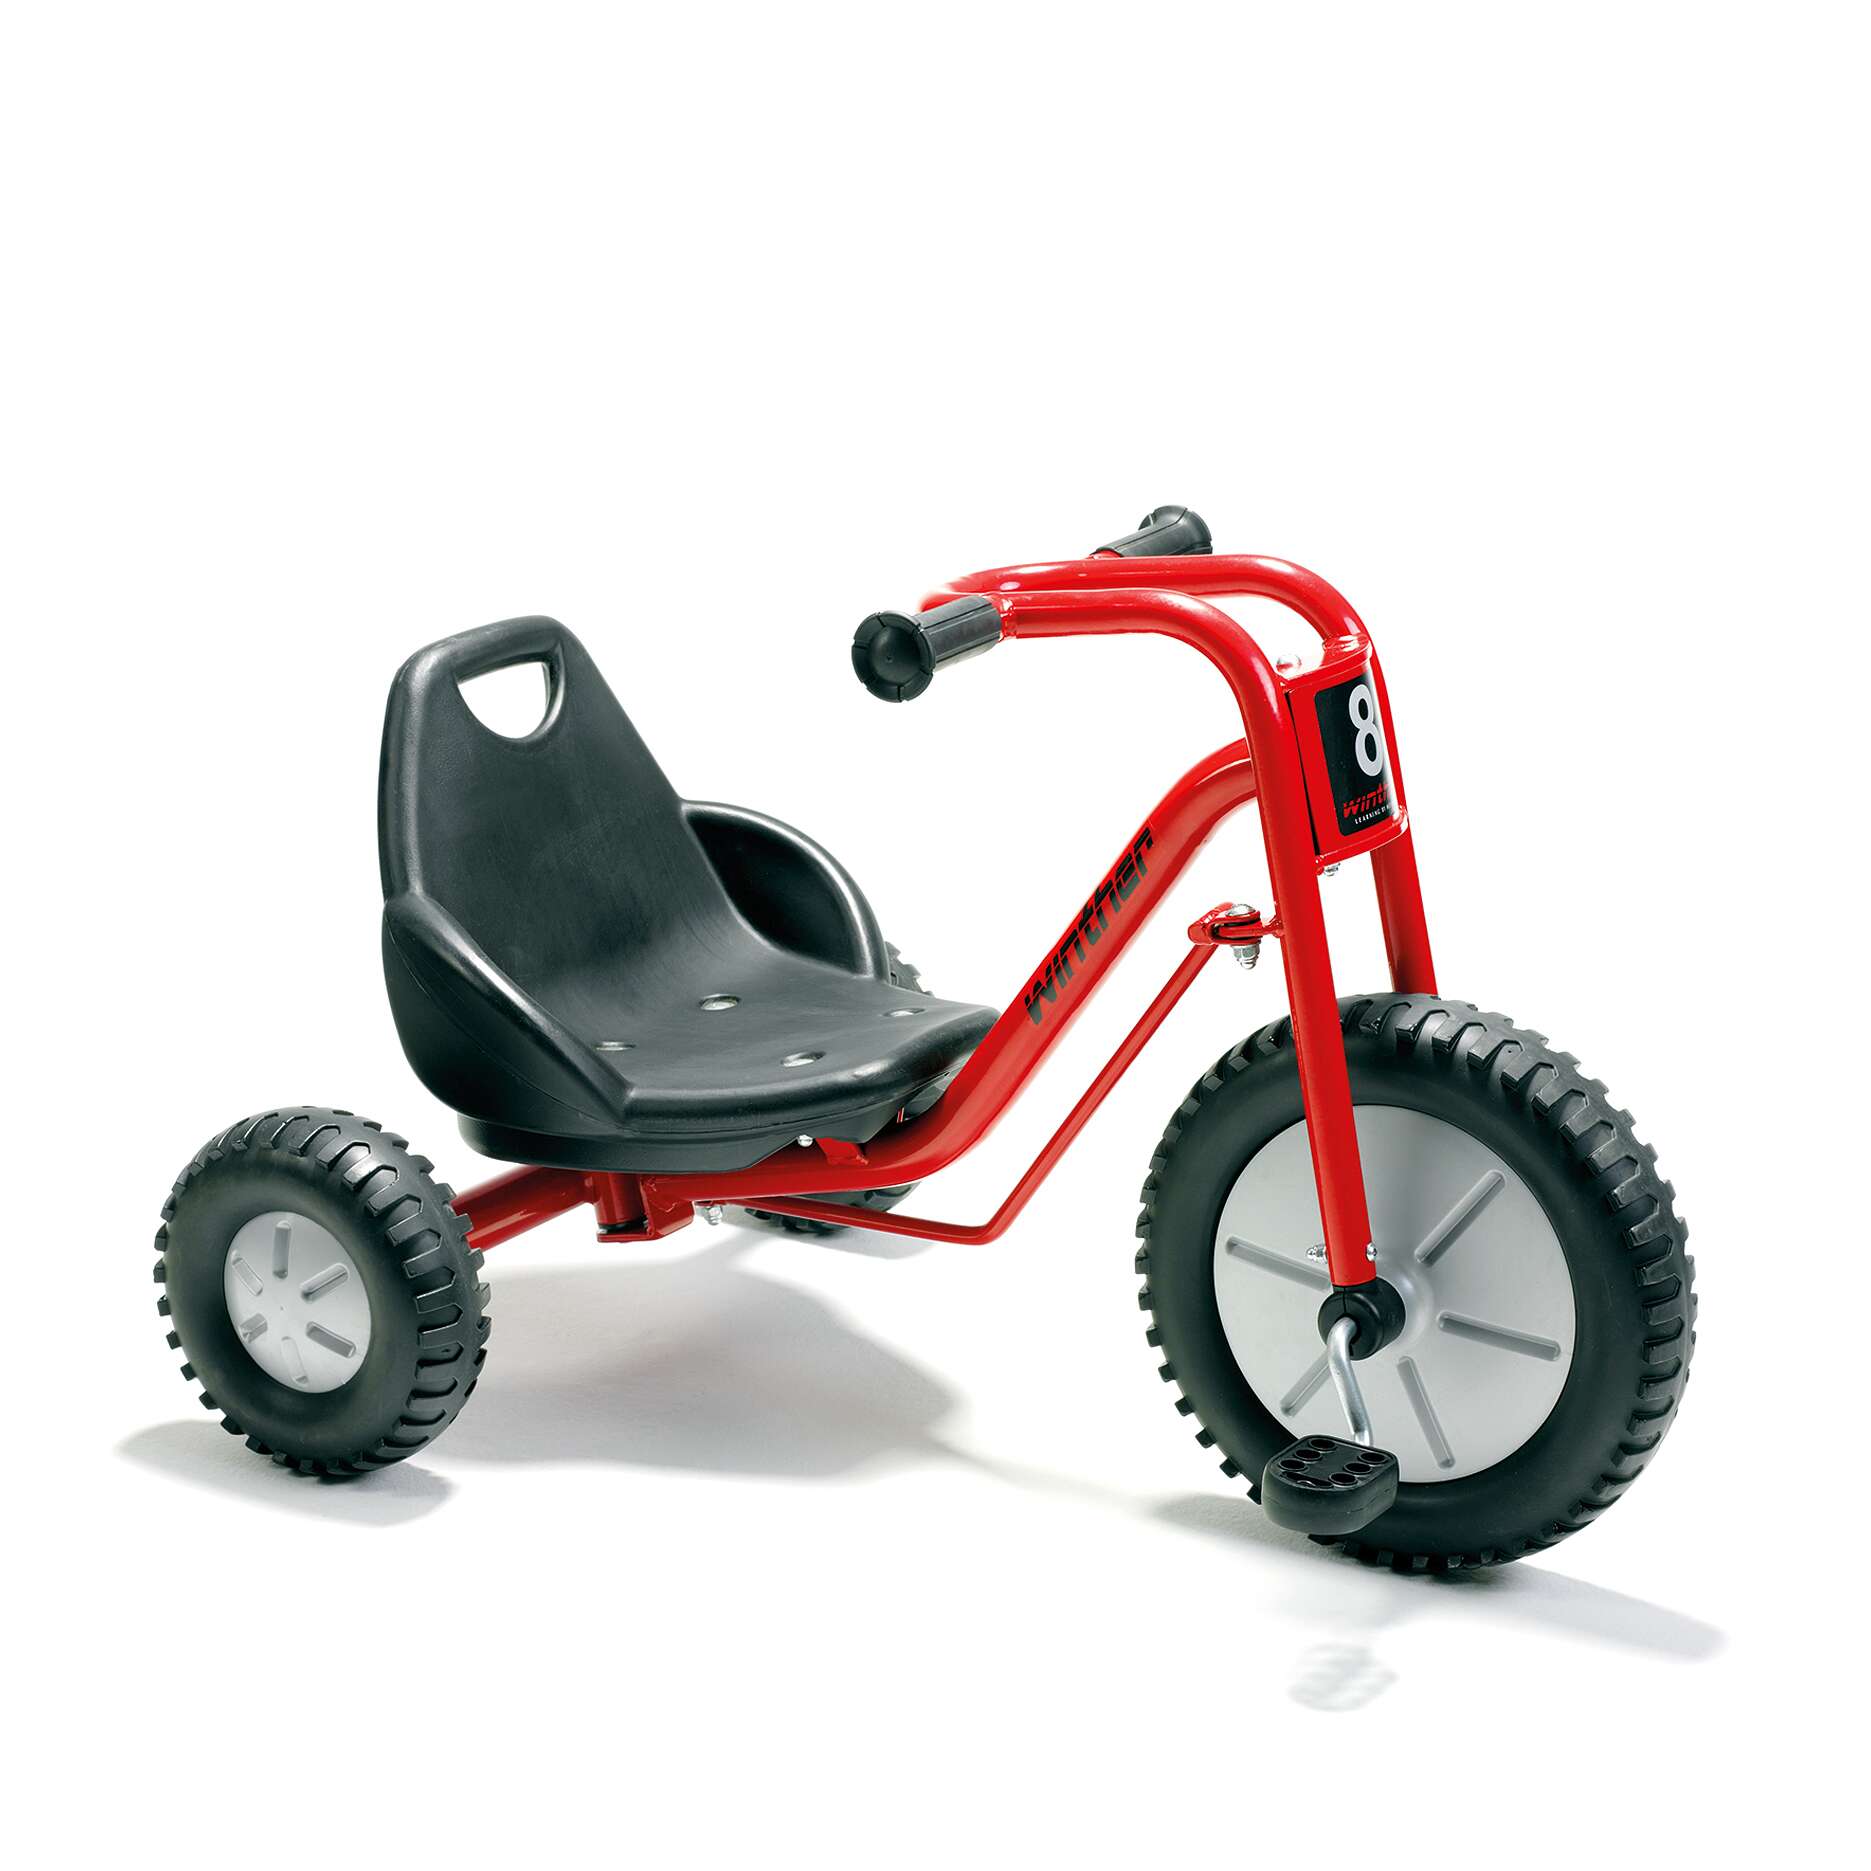 Winther Viking Dreirad "Explorer Zlalom Tricycle" von Winther